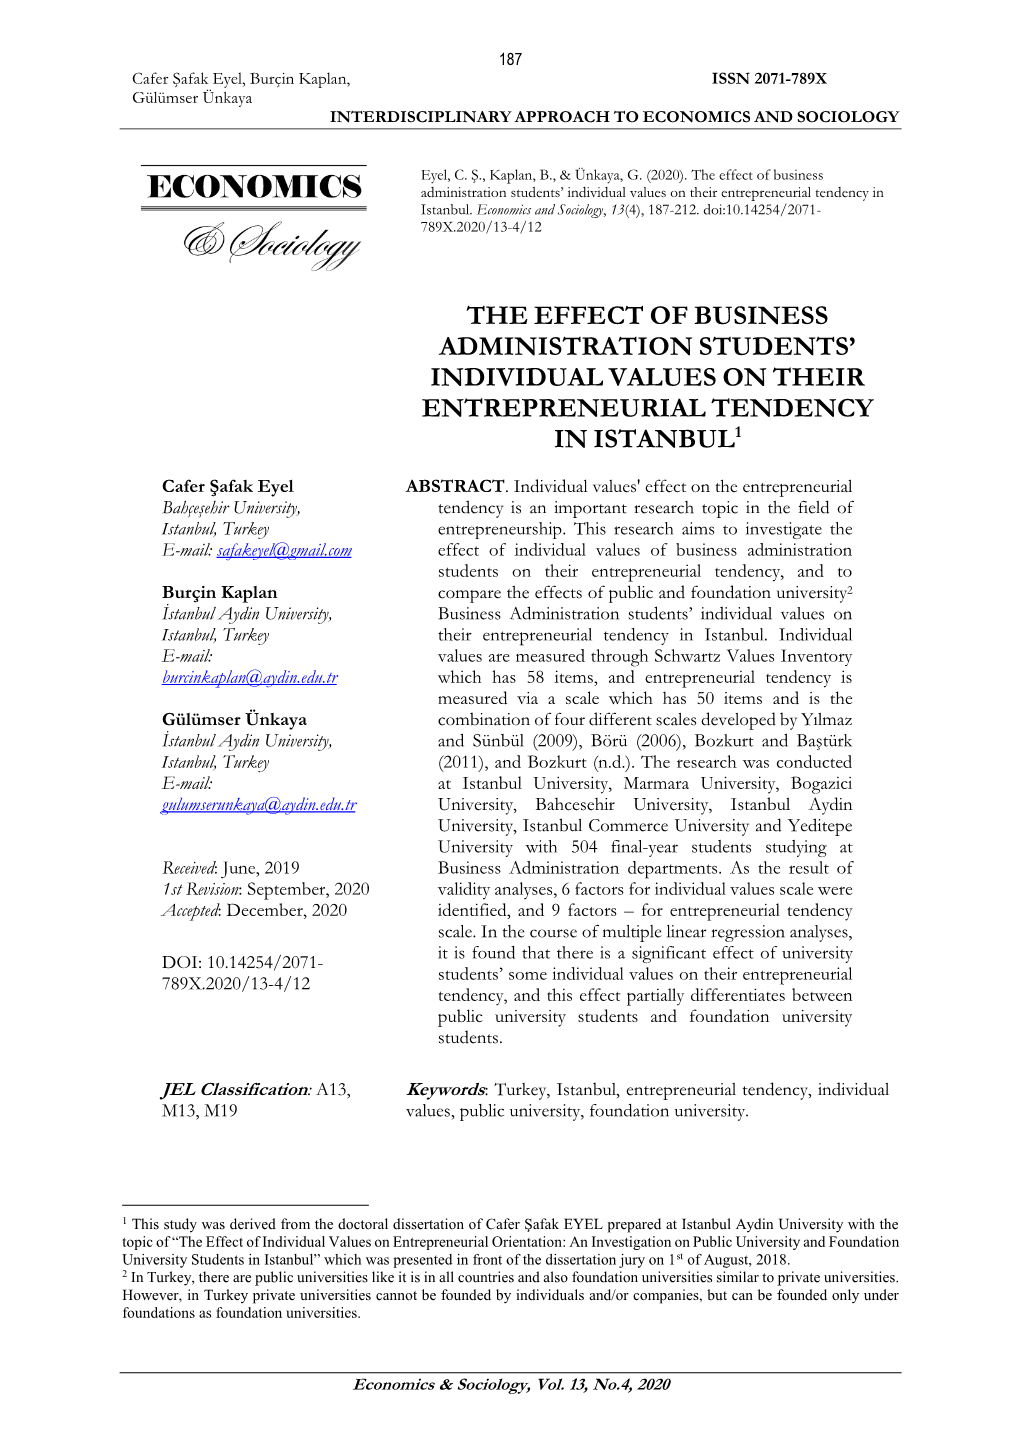 The Effect of Individual Values on Entrepreneurial Tendency: An